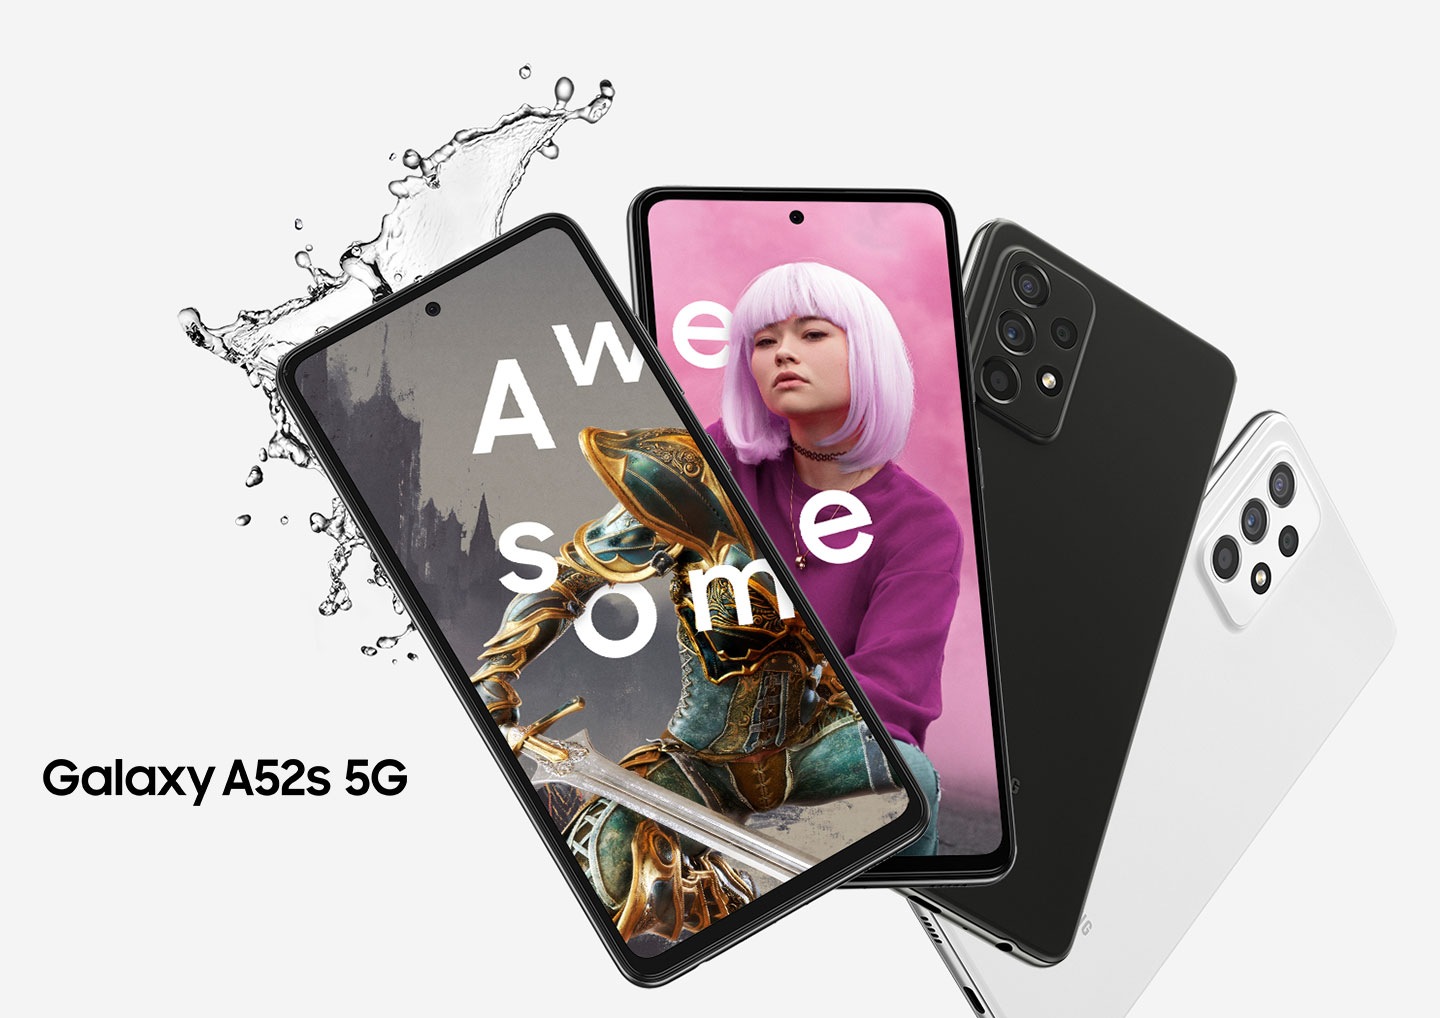 Four galaxy a52s 5g in black and white fanned out with two seen from the front and two seen from the rear. The screen displays a woman in a pink wig.